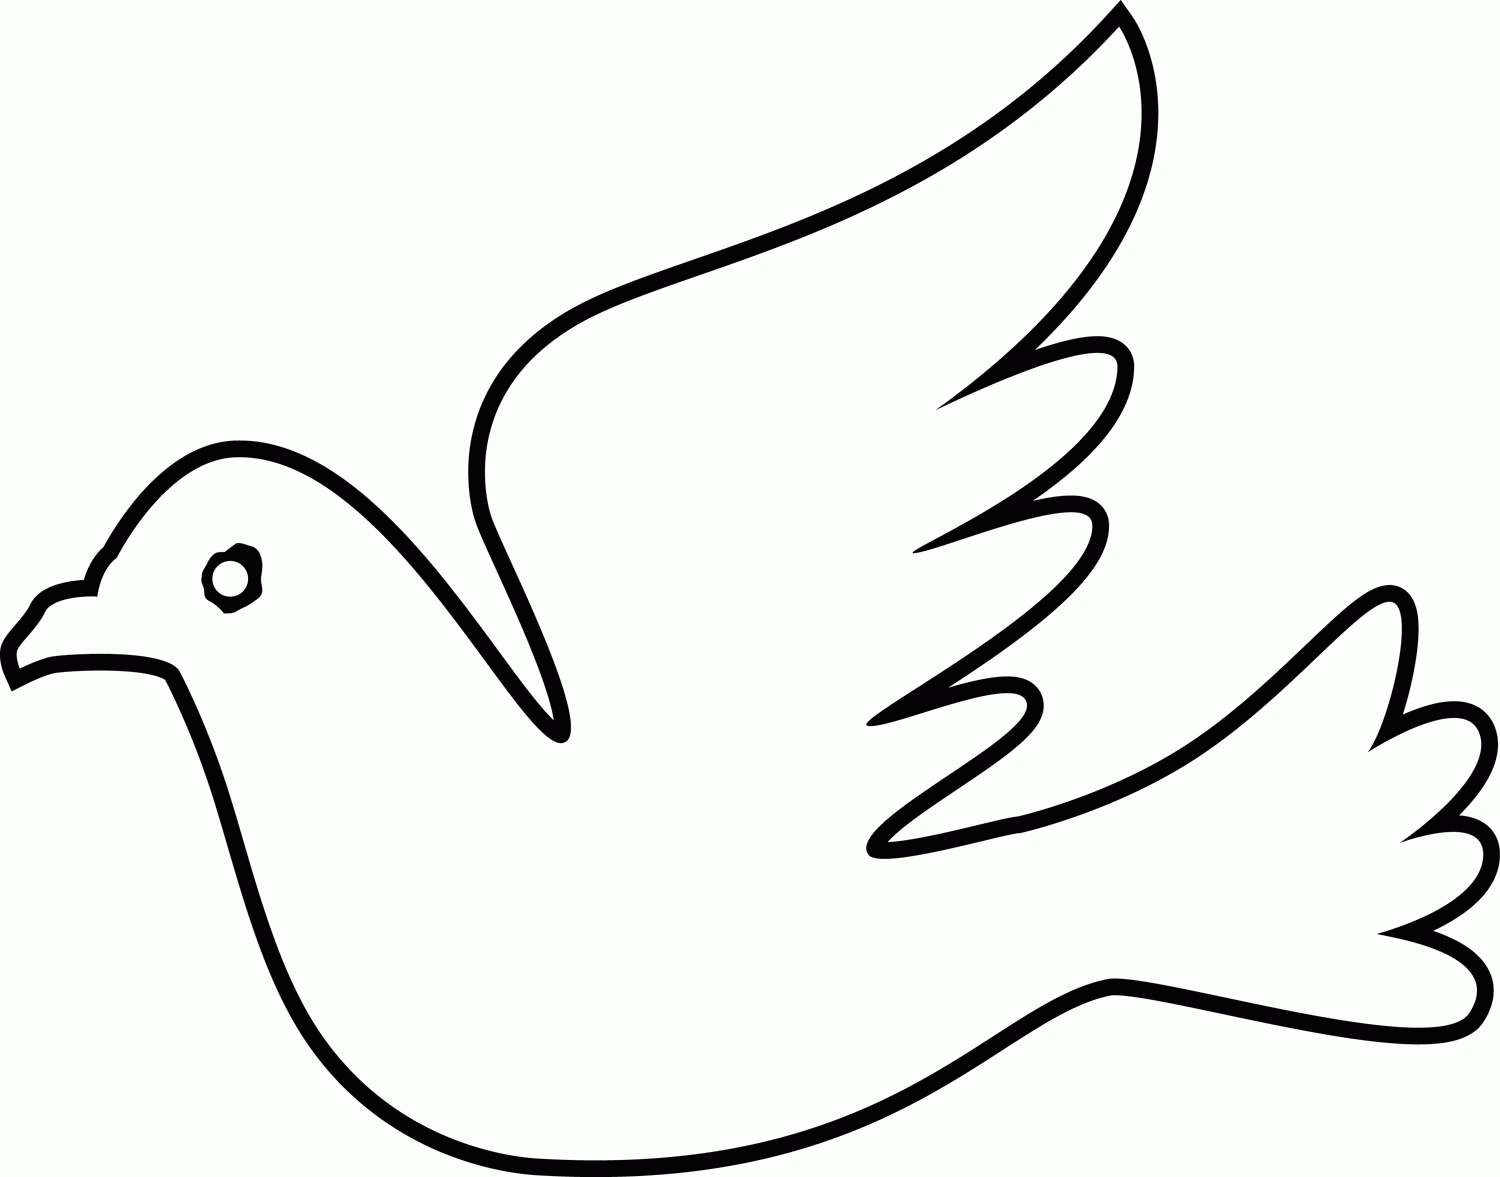 Turtle Doves Coloring Pages - Coloring Home